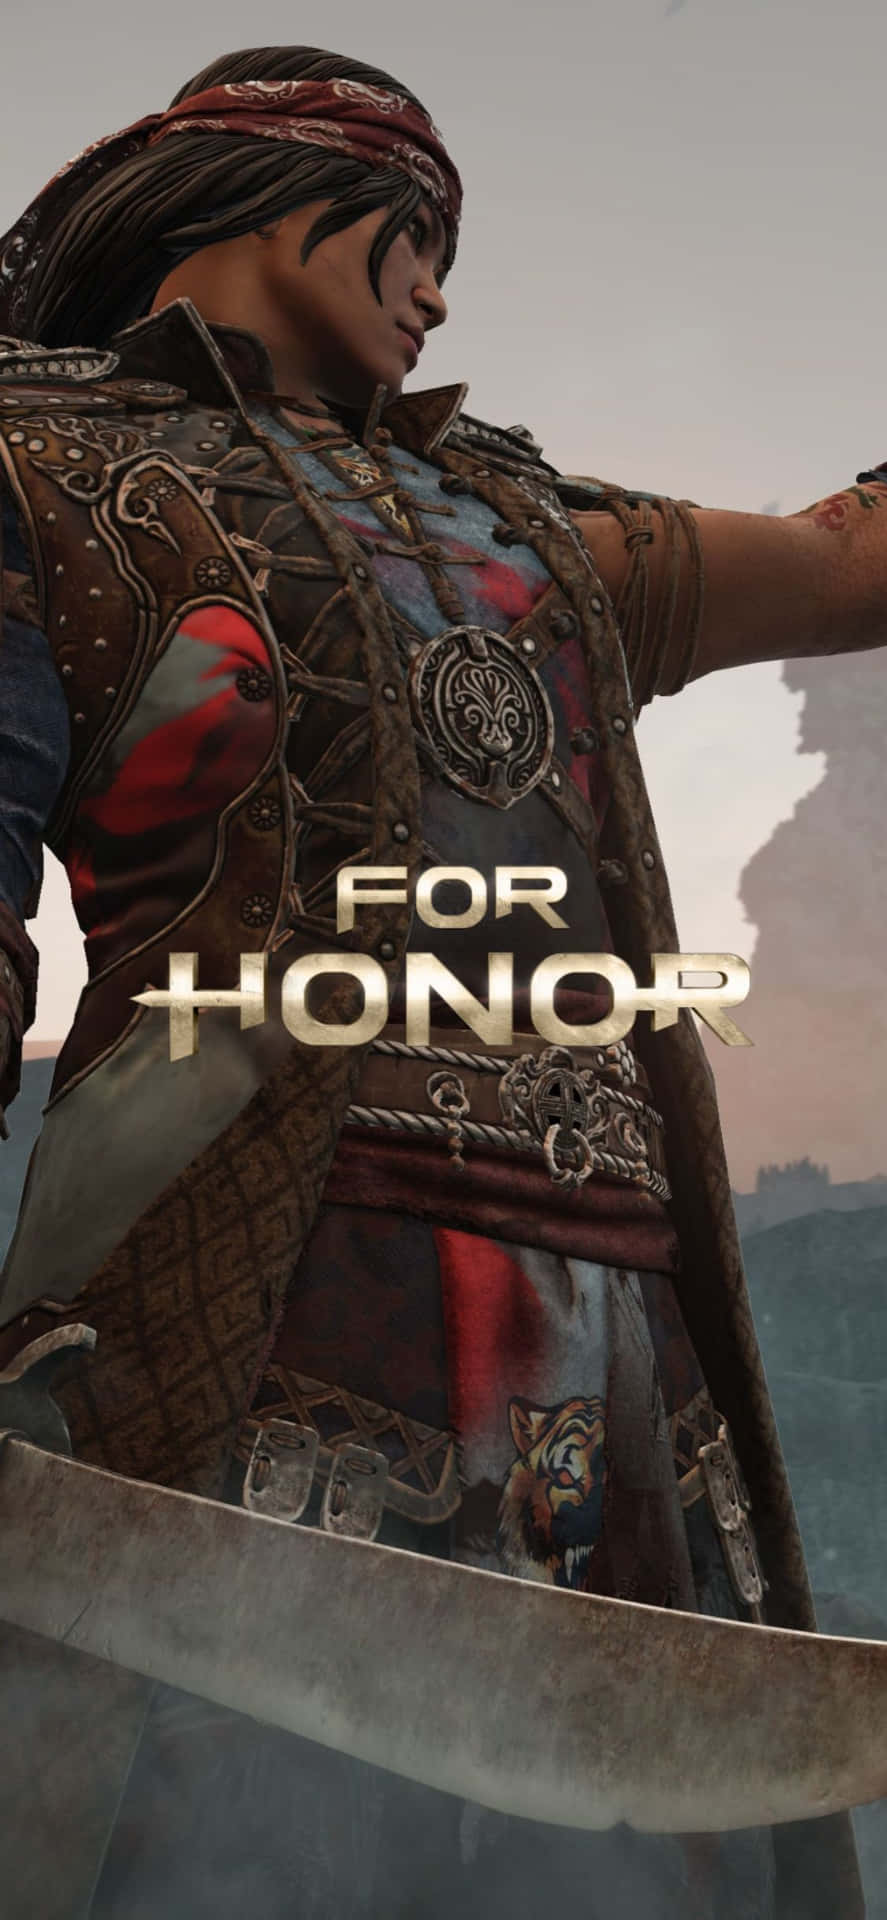 Show your courage and loyalty with an Iphone Xs — For Honor.